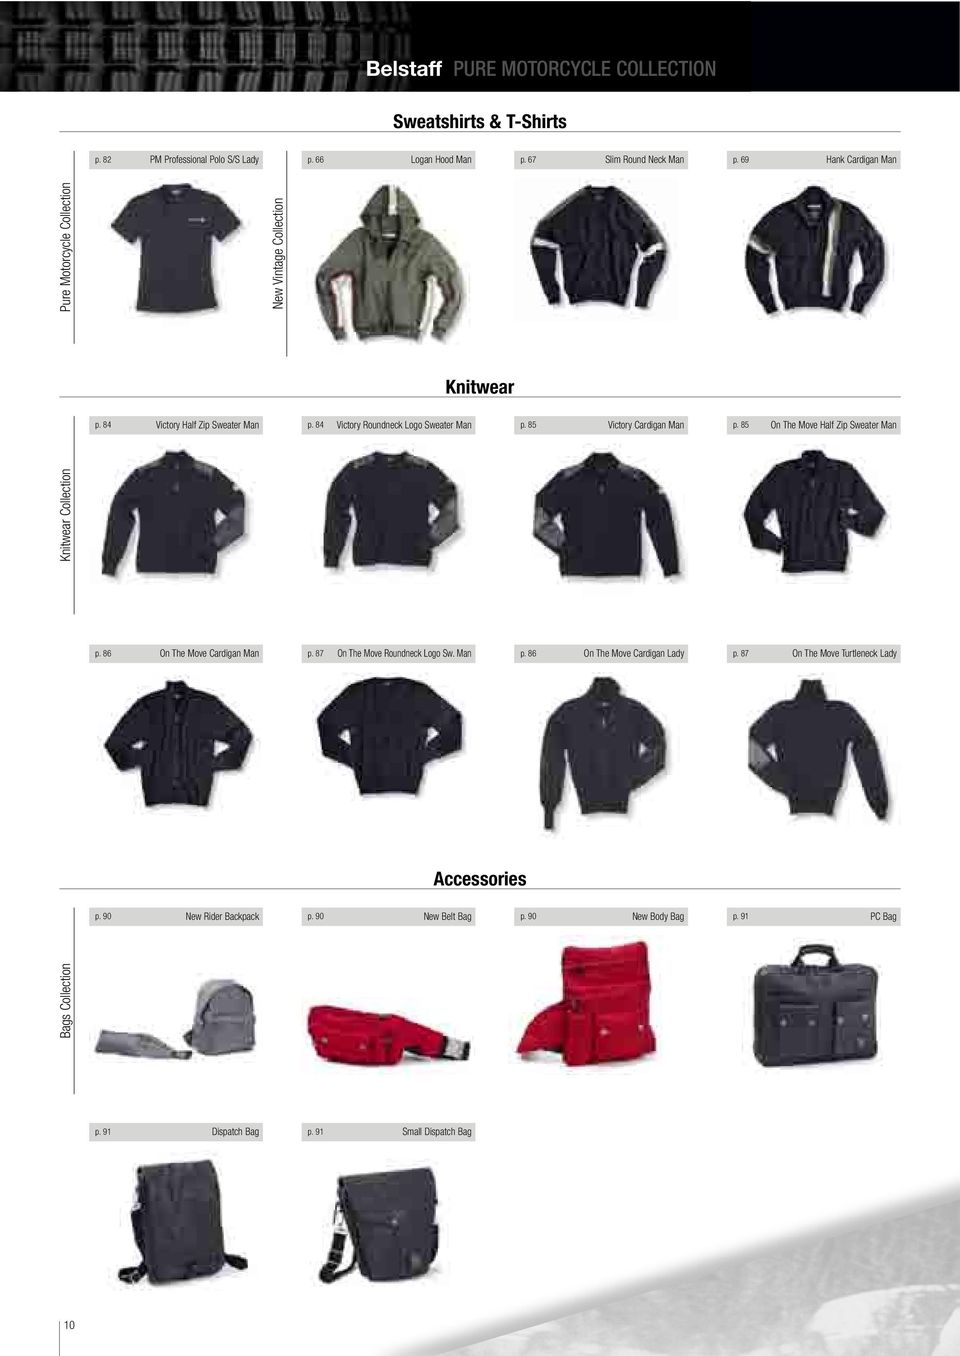 85 On The Move Half Zip Sweater Man Knitwear Collection p. 86 On The Move Cardigan Man p. 87 On The Move Roundneck Logo Sw. Man p. 86 On The Move Cardigan Lady Accessories p.